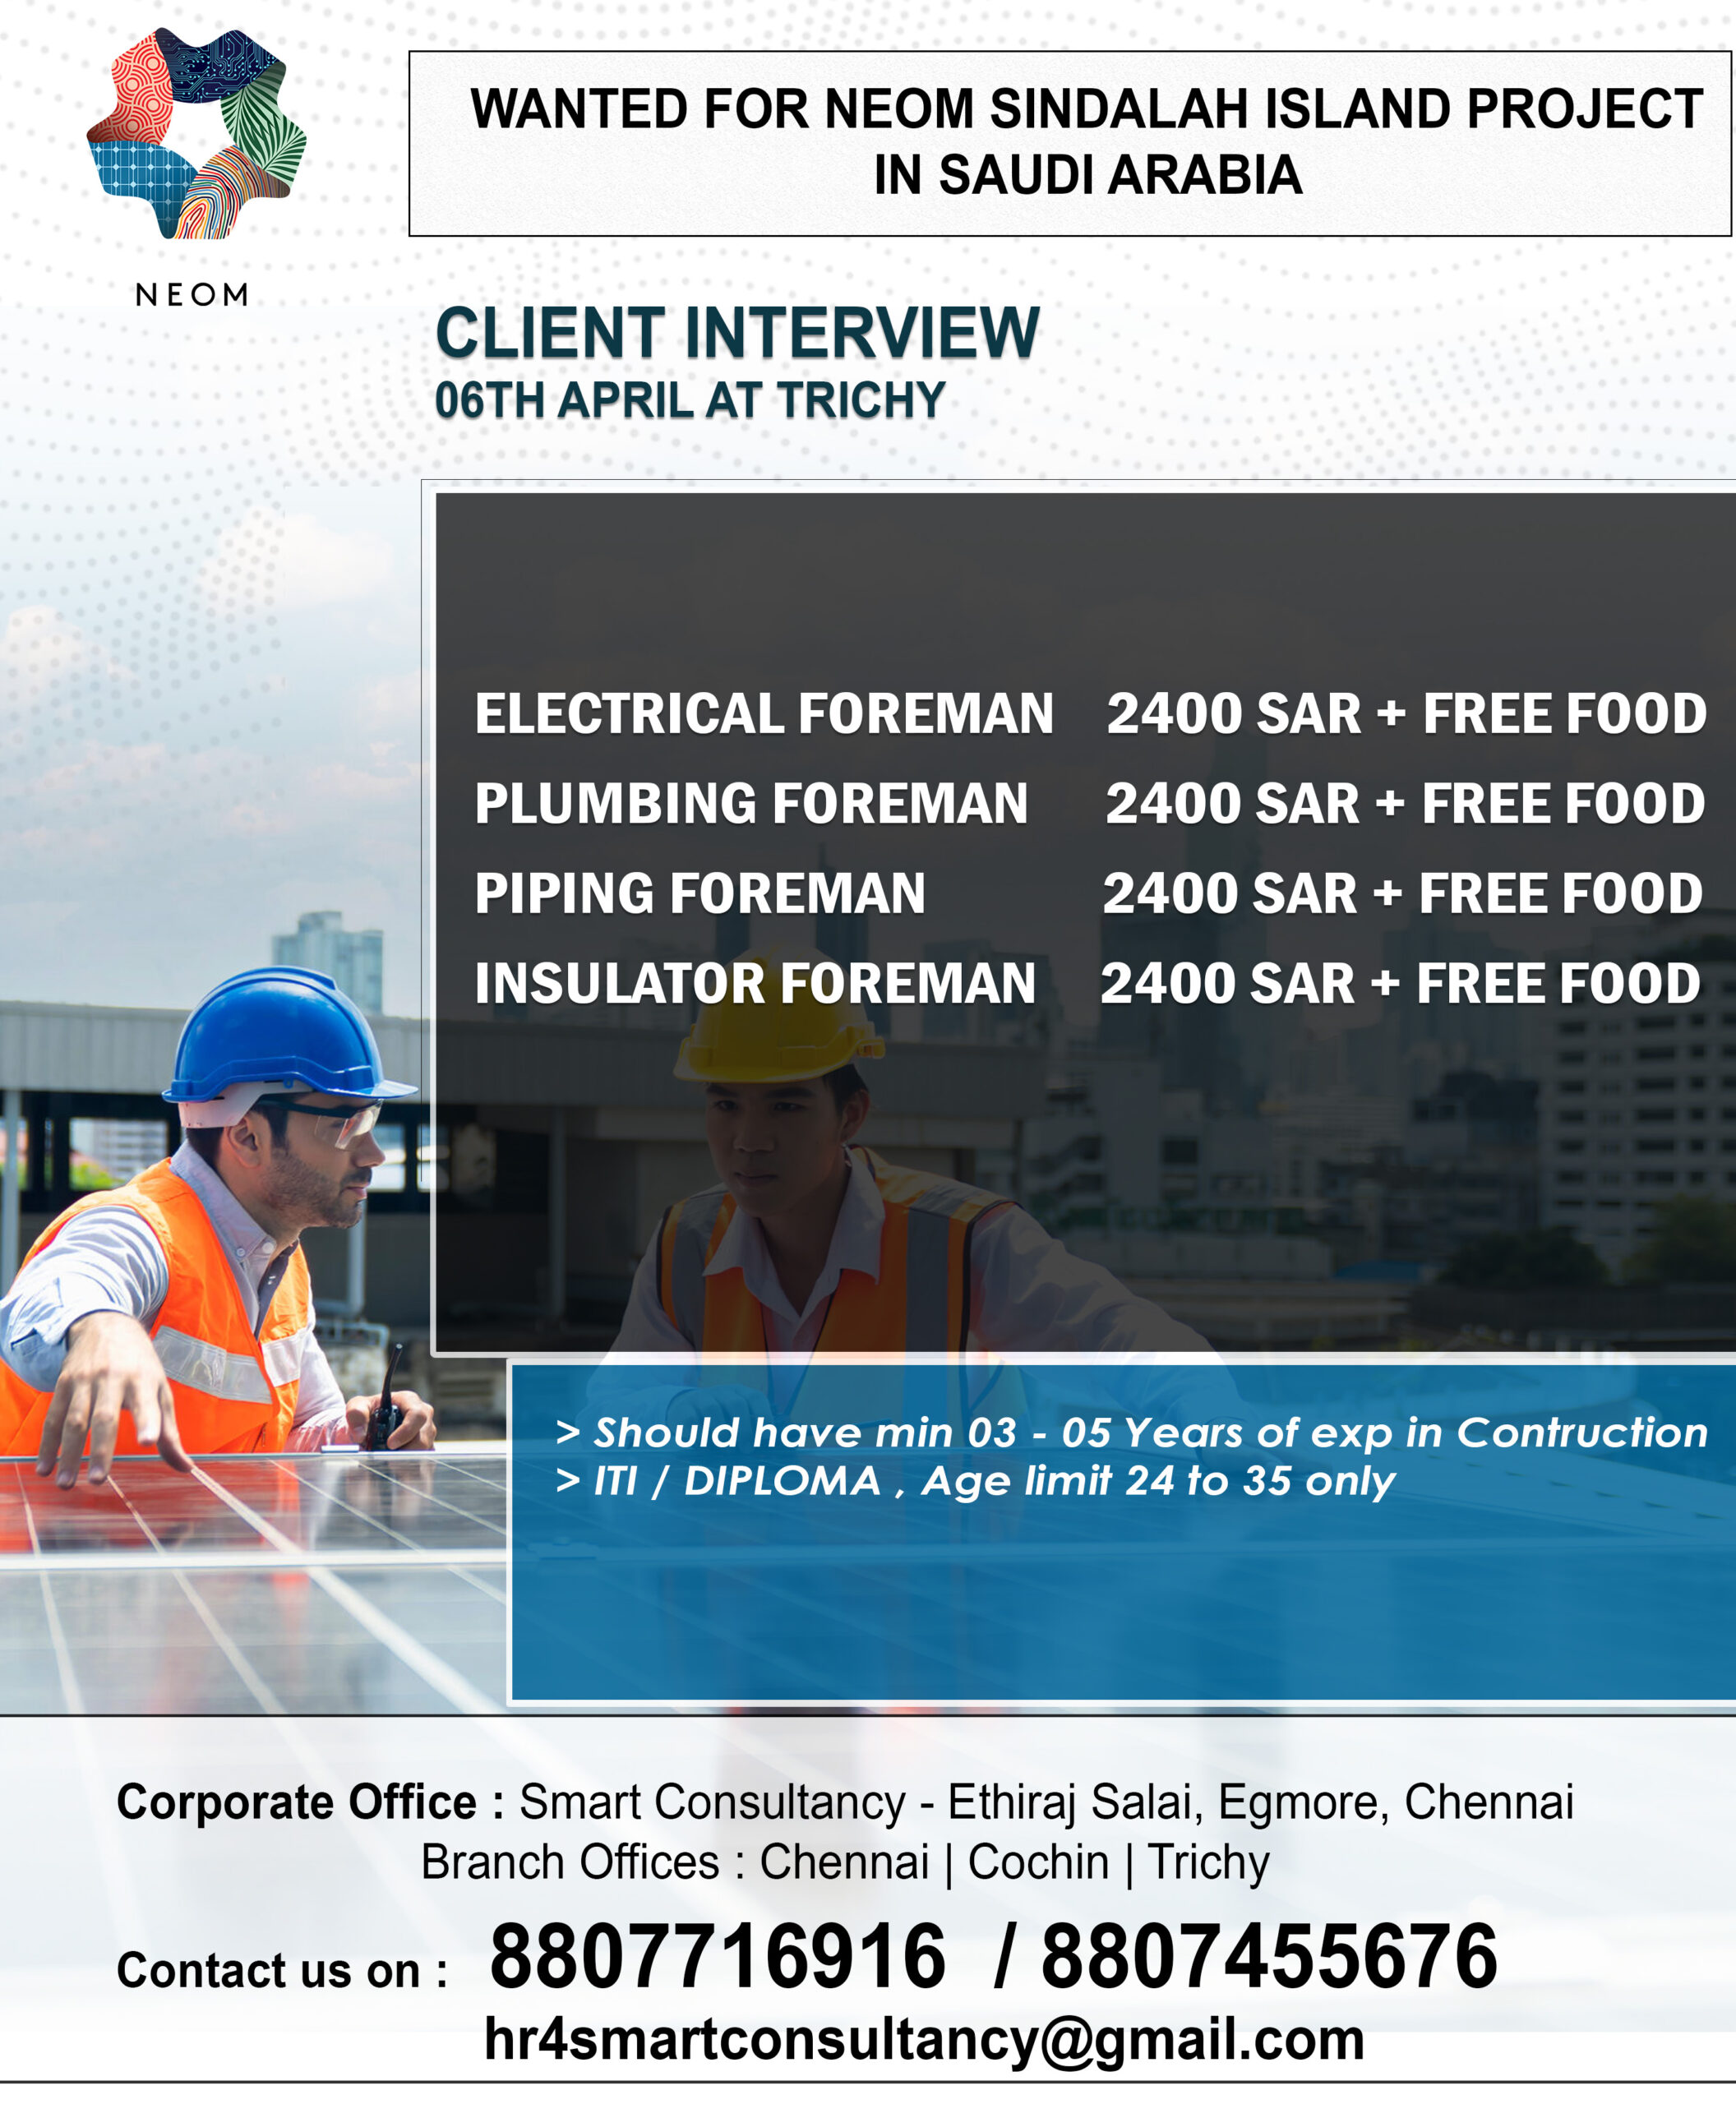 FACE TO FACE CLIENT INTERVIEW ON 6TH APRIL AT TRICHY